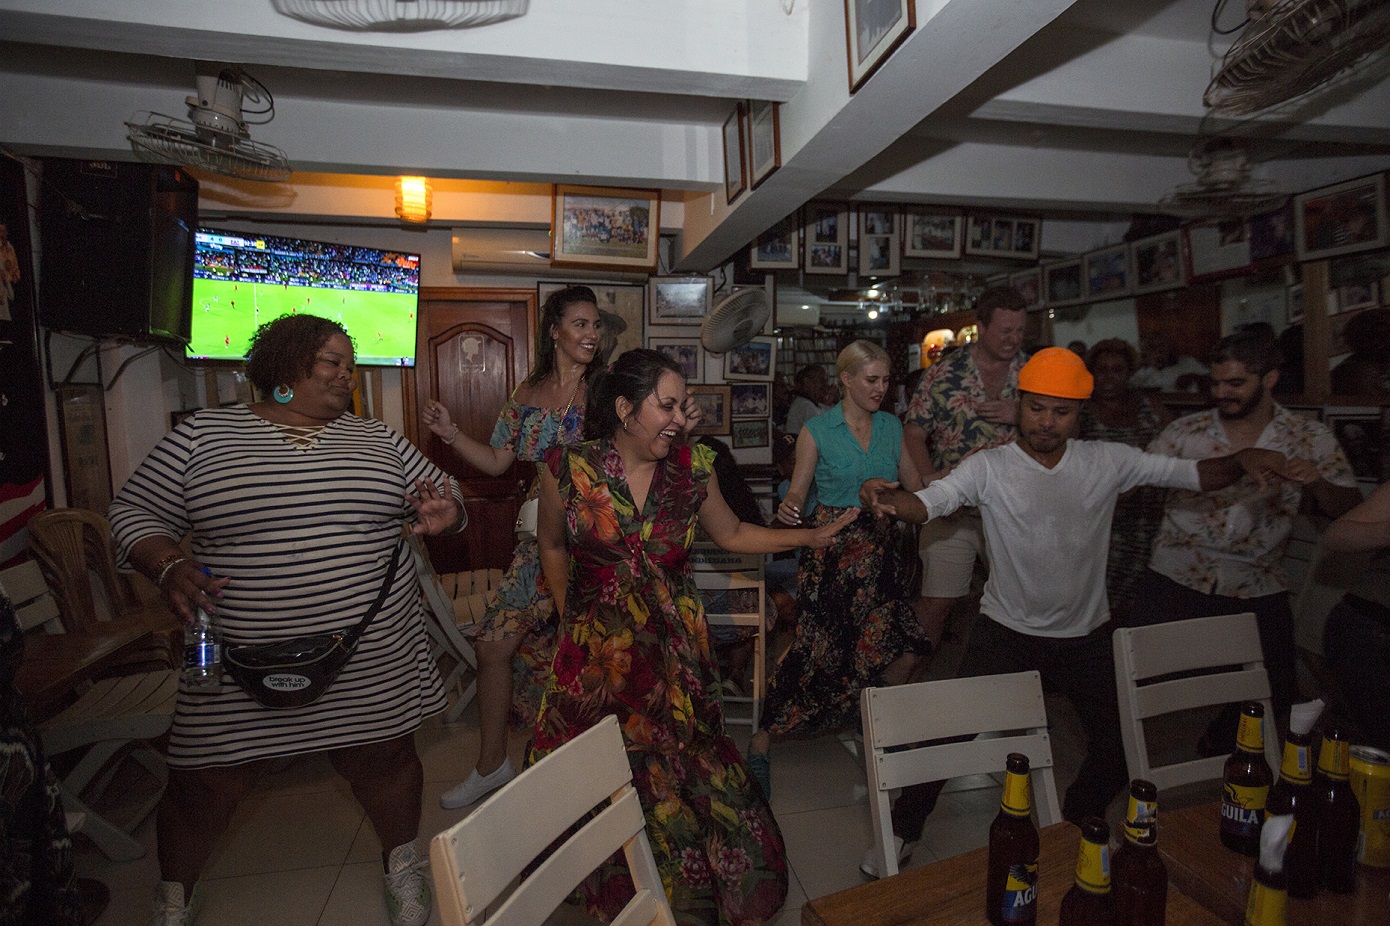 Dancing salsa with locals